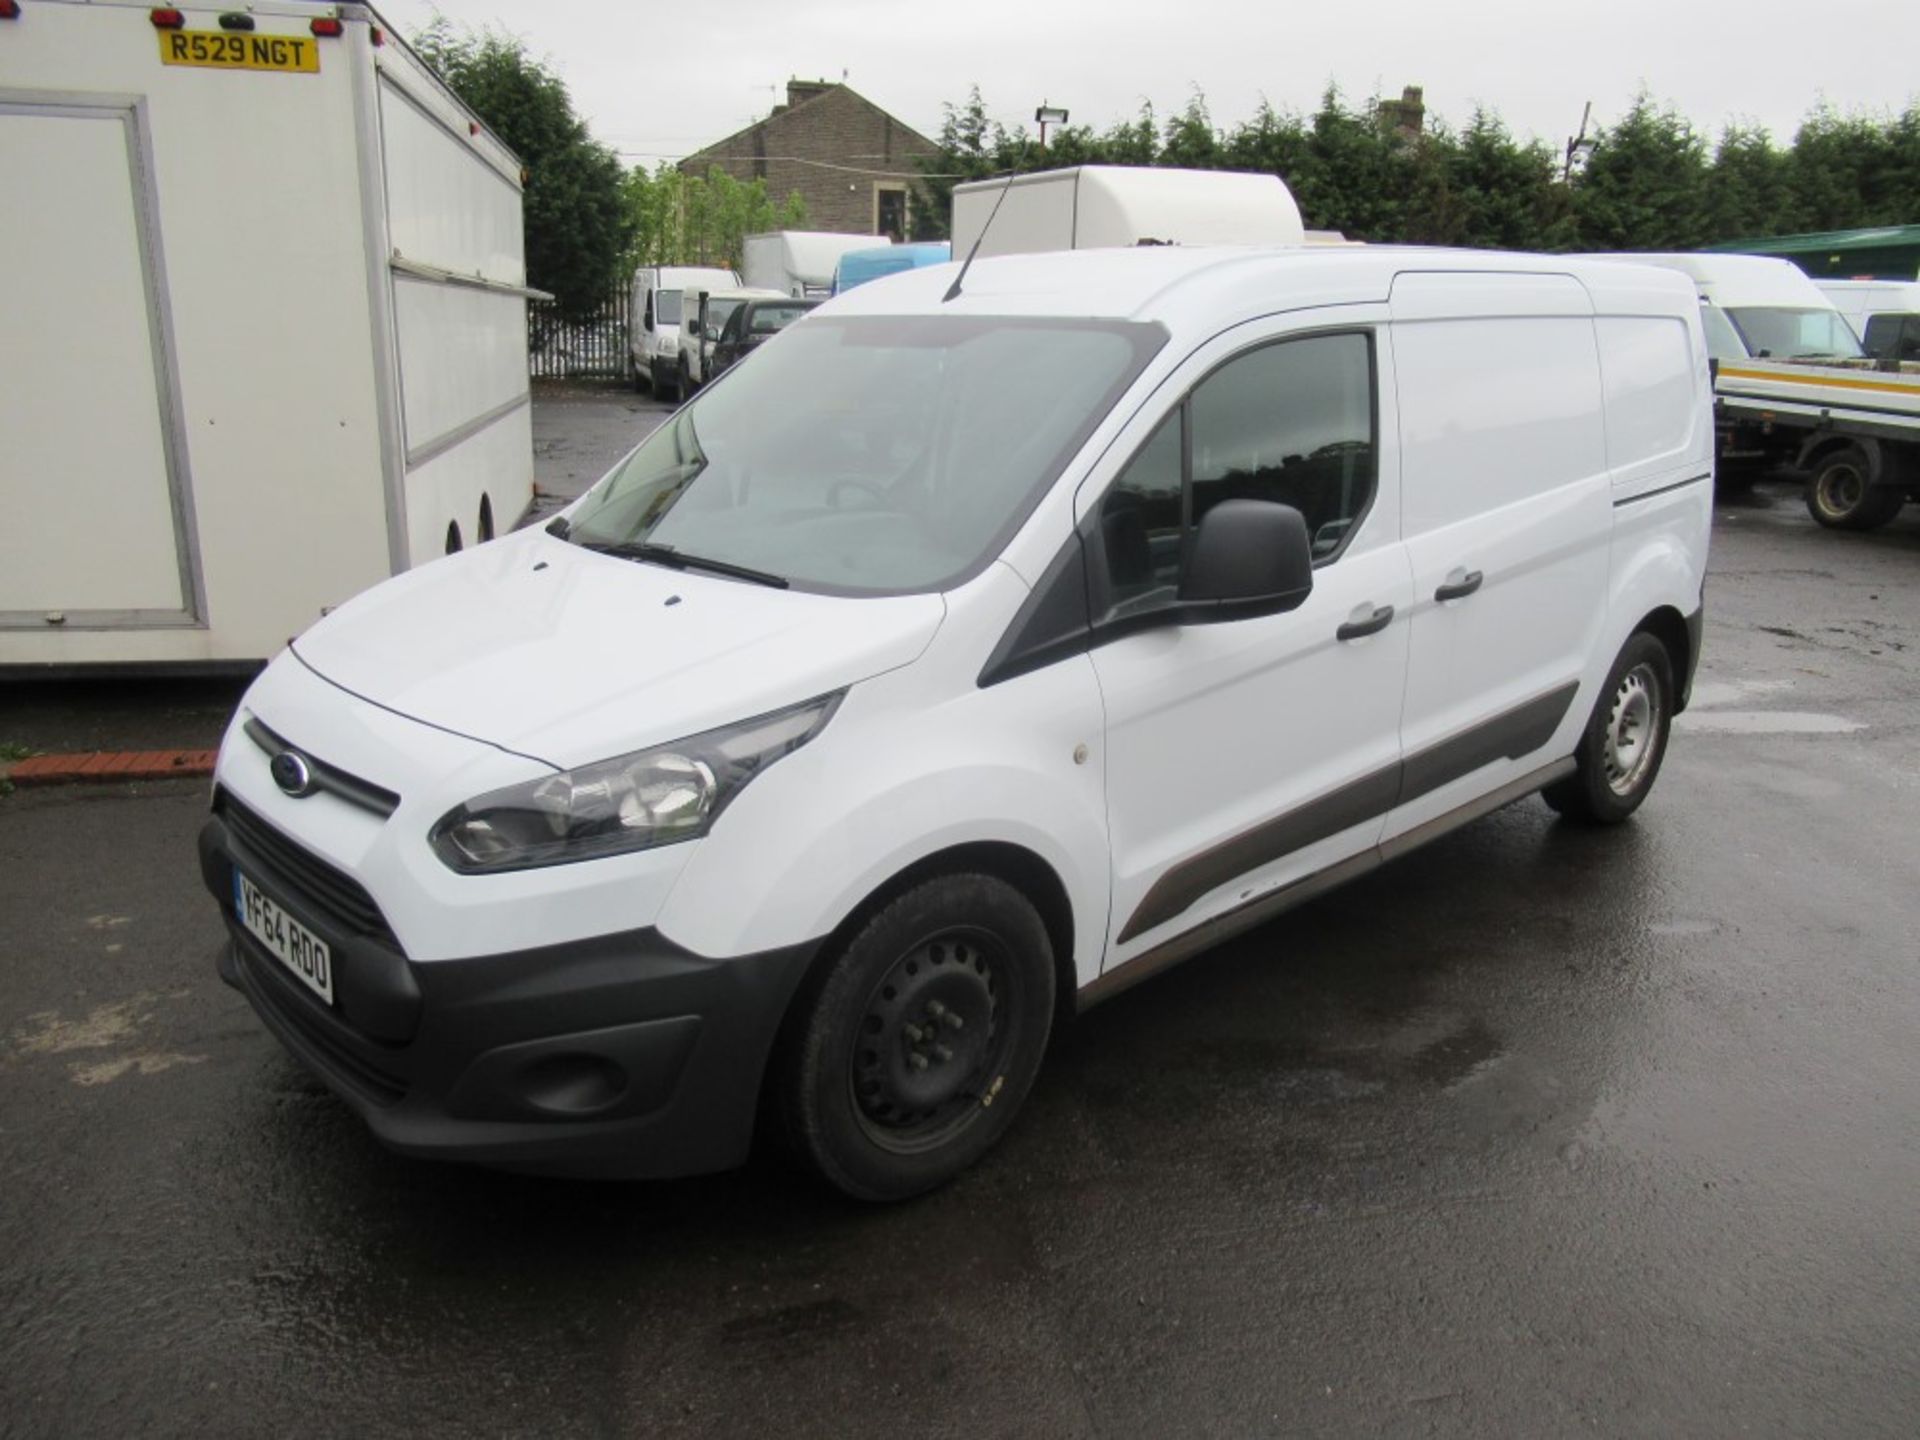 64 reg FORD TRANSIT CONNECT 210 ECO-TECH, 1ST REG 01/15, TEST 01/20, 108763M WARRANTED, V5 HERE, 1 - Image 2 of 6